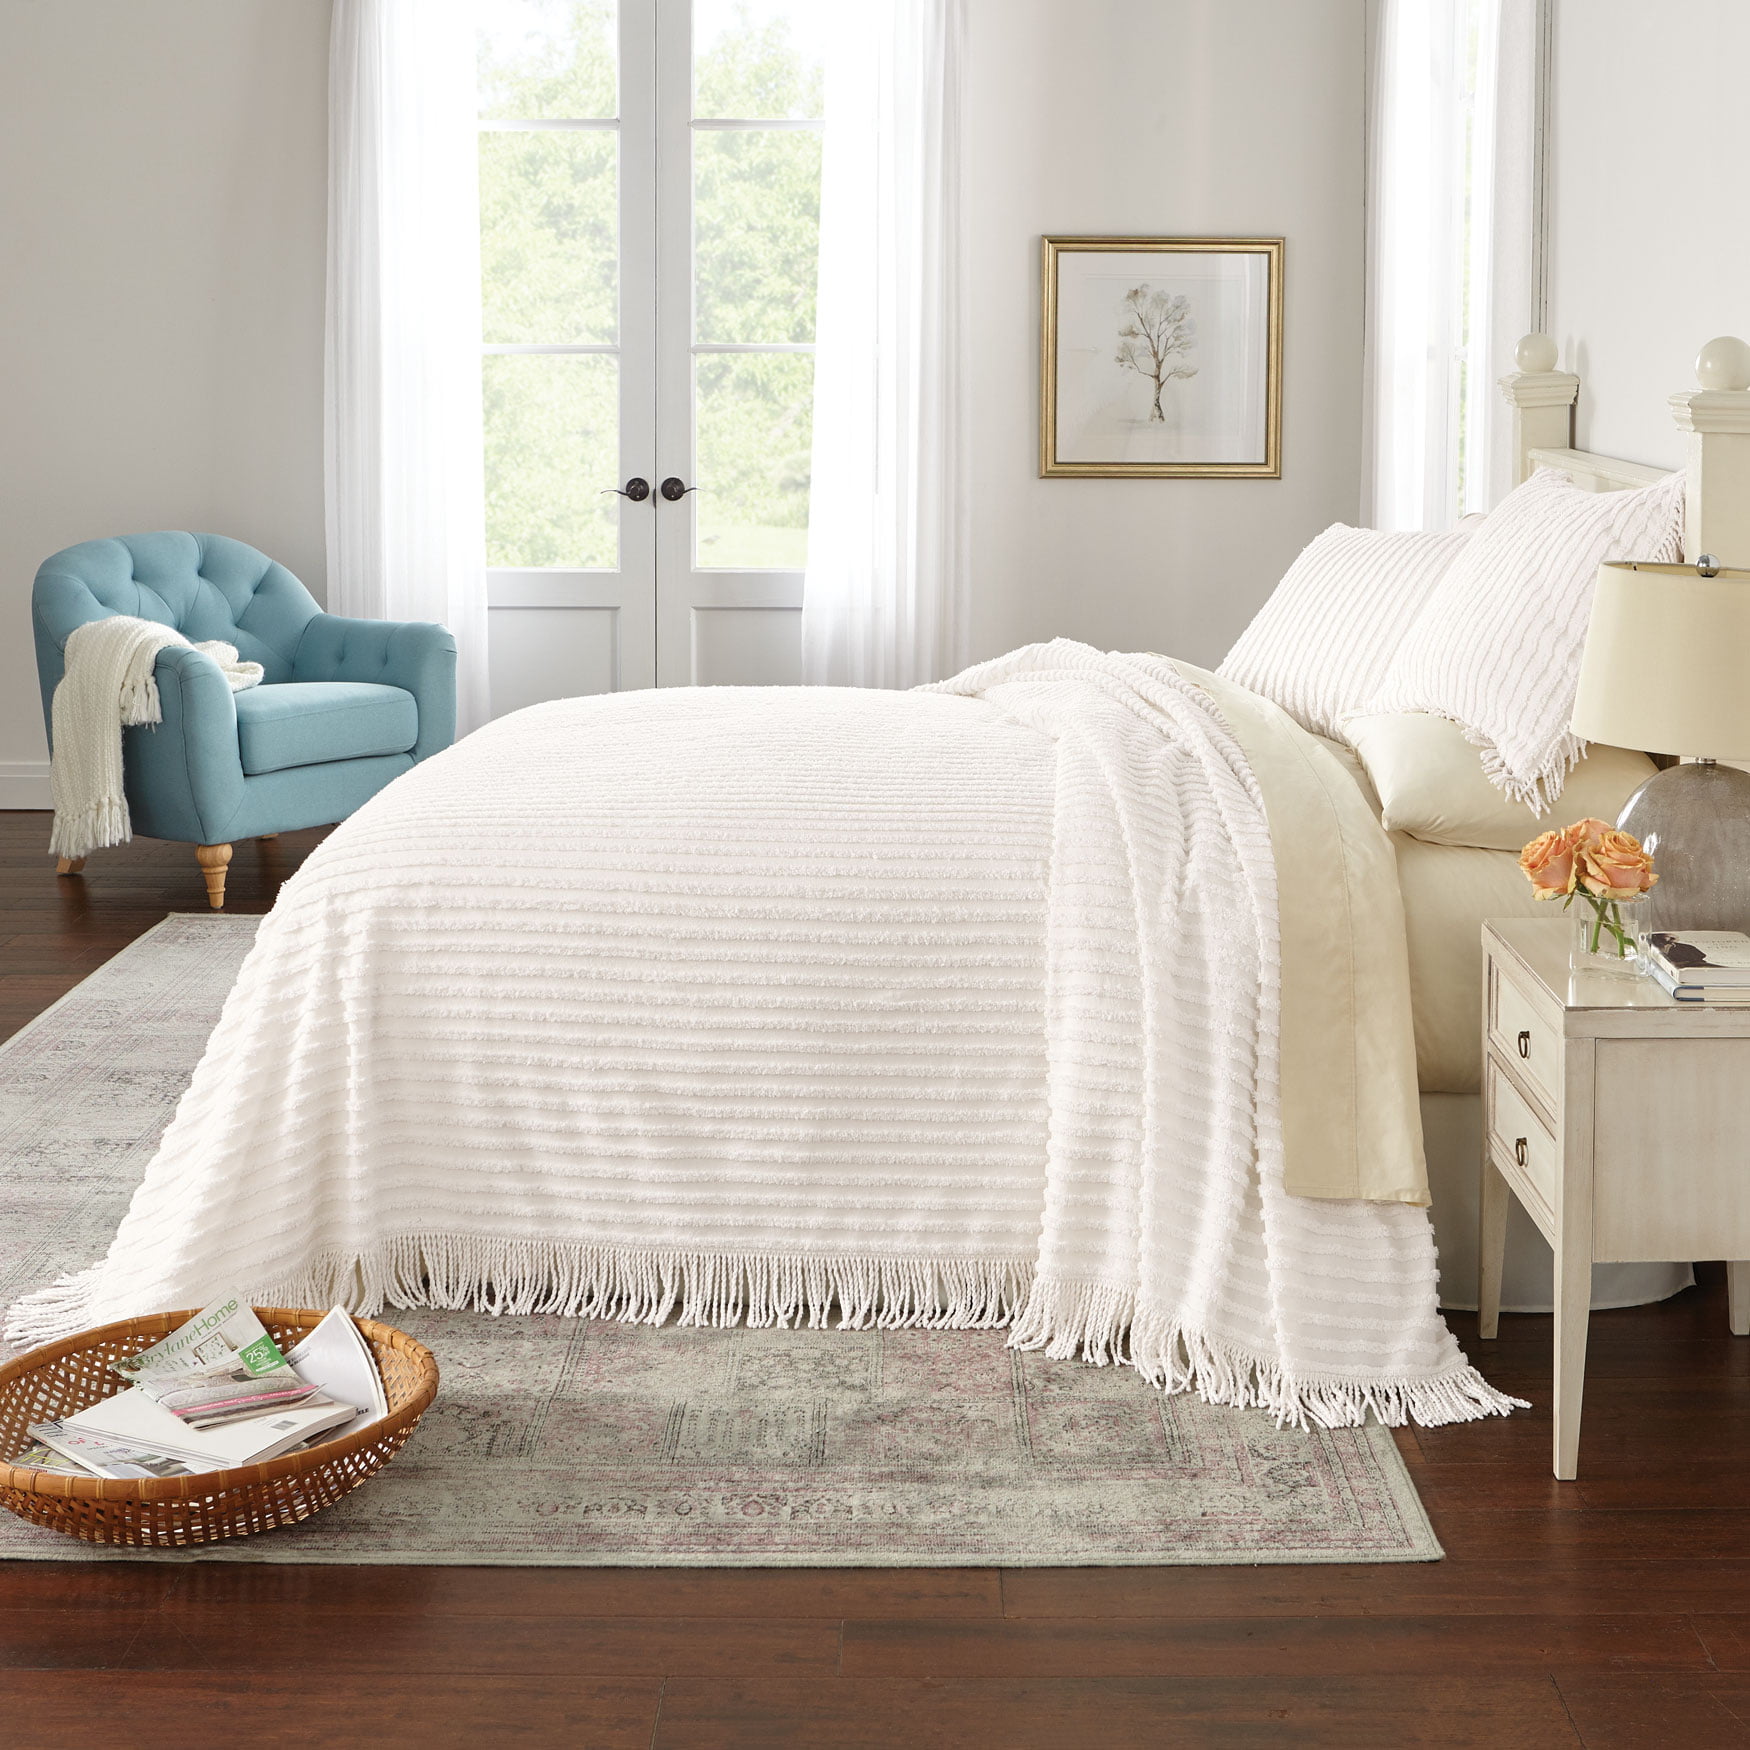 Details about   BrylaneHome Chenille Bedspread Bedding Collection 